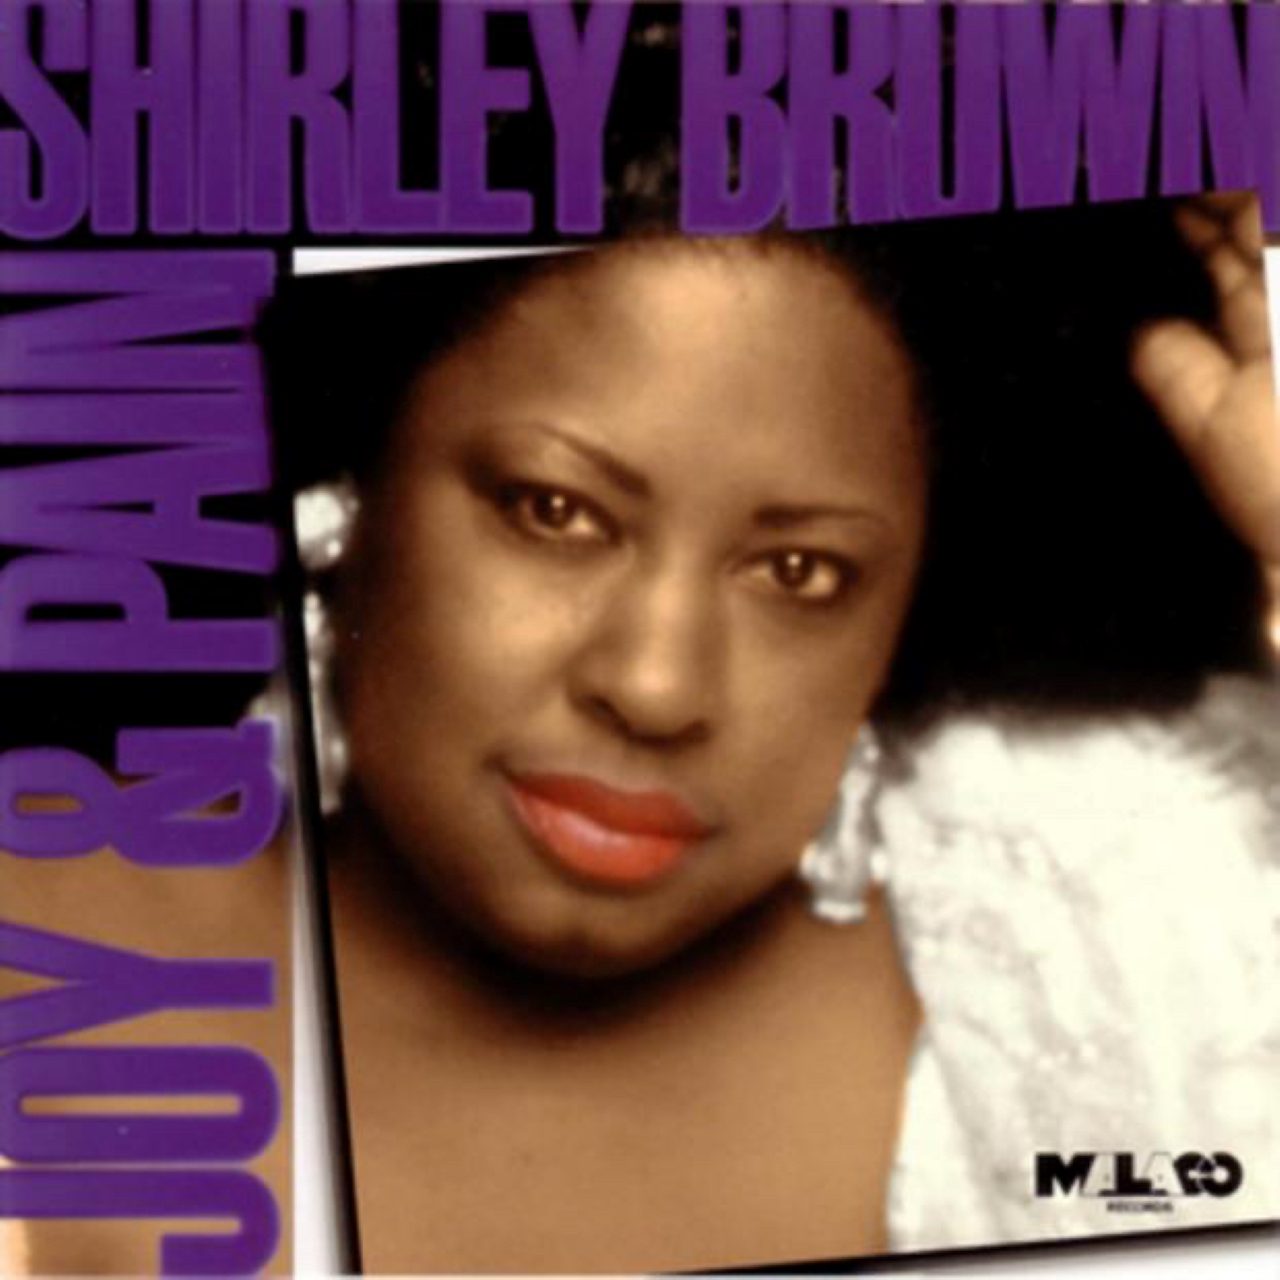 Shirley Brown – Joy And Pain cover album